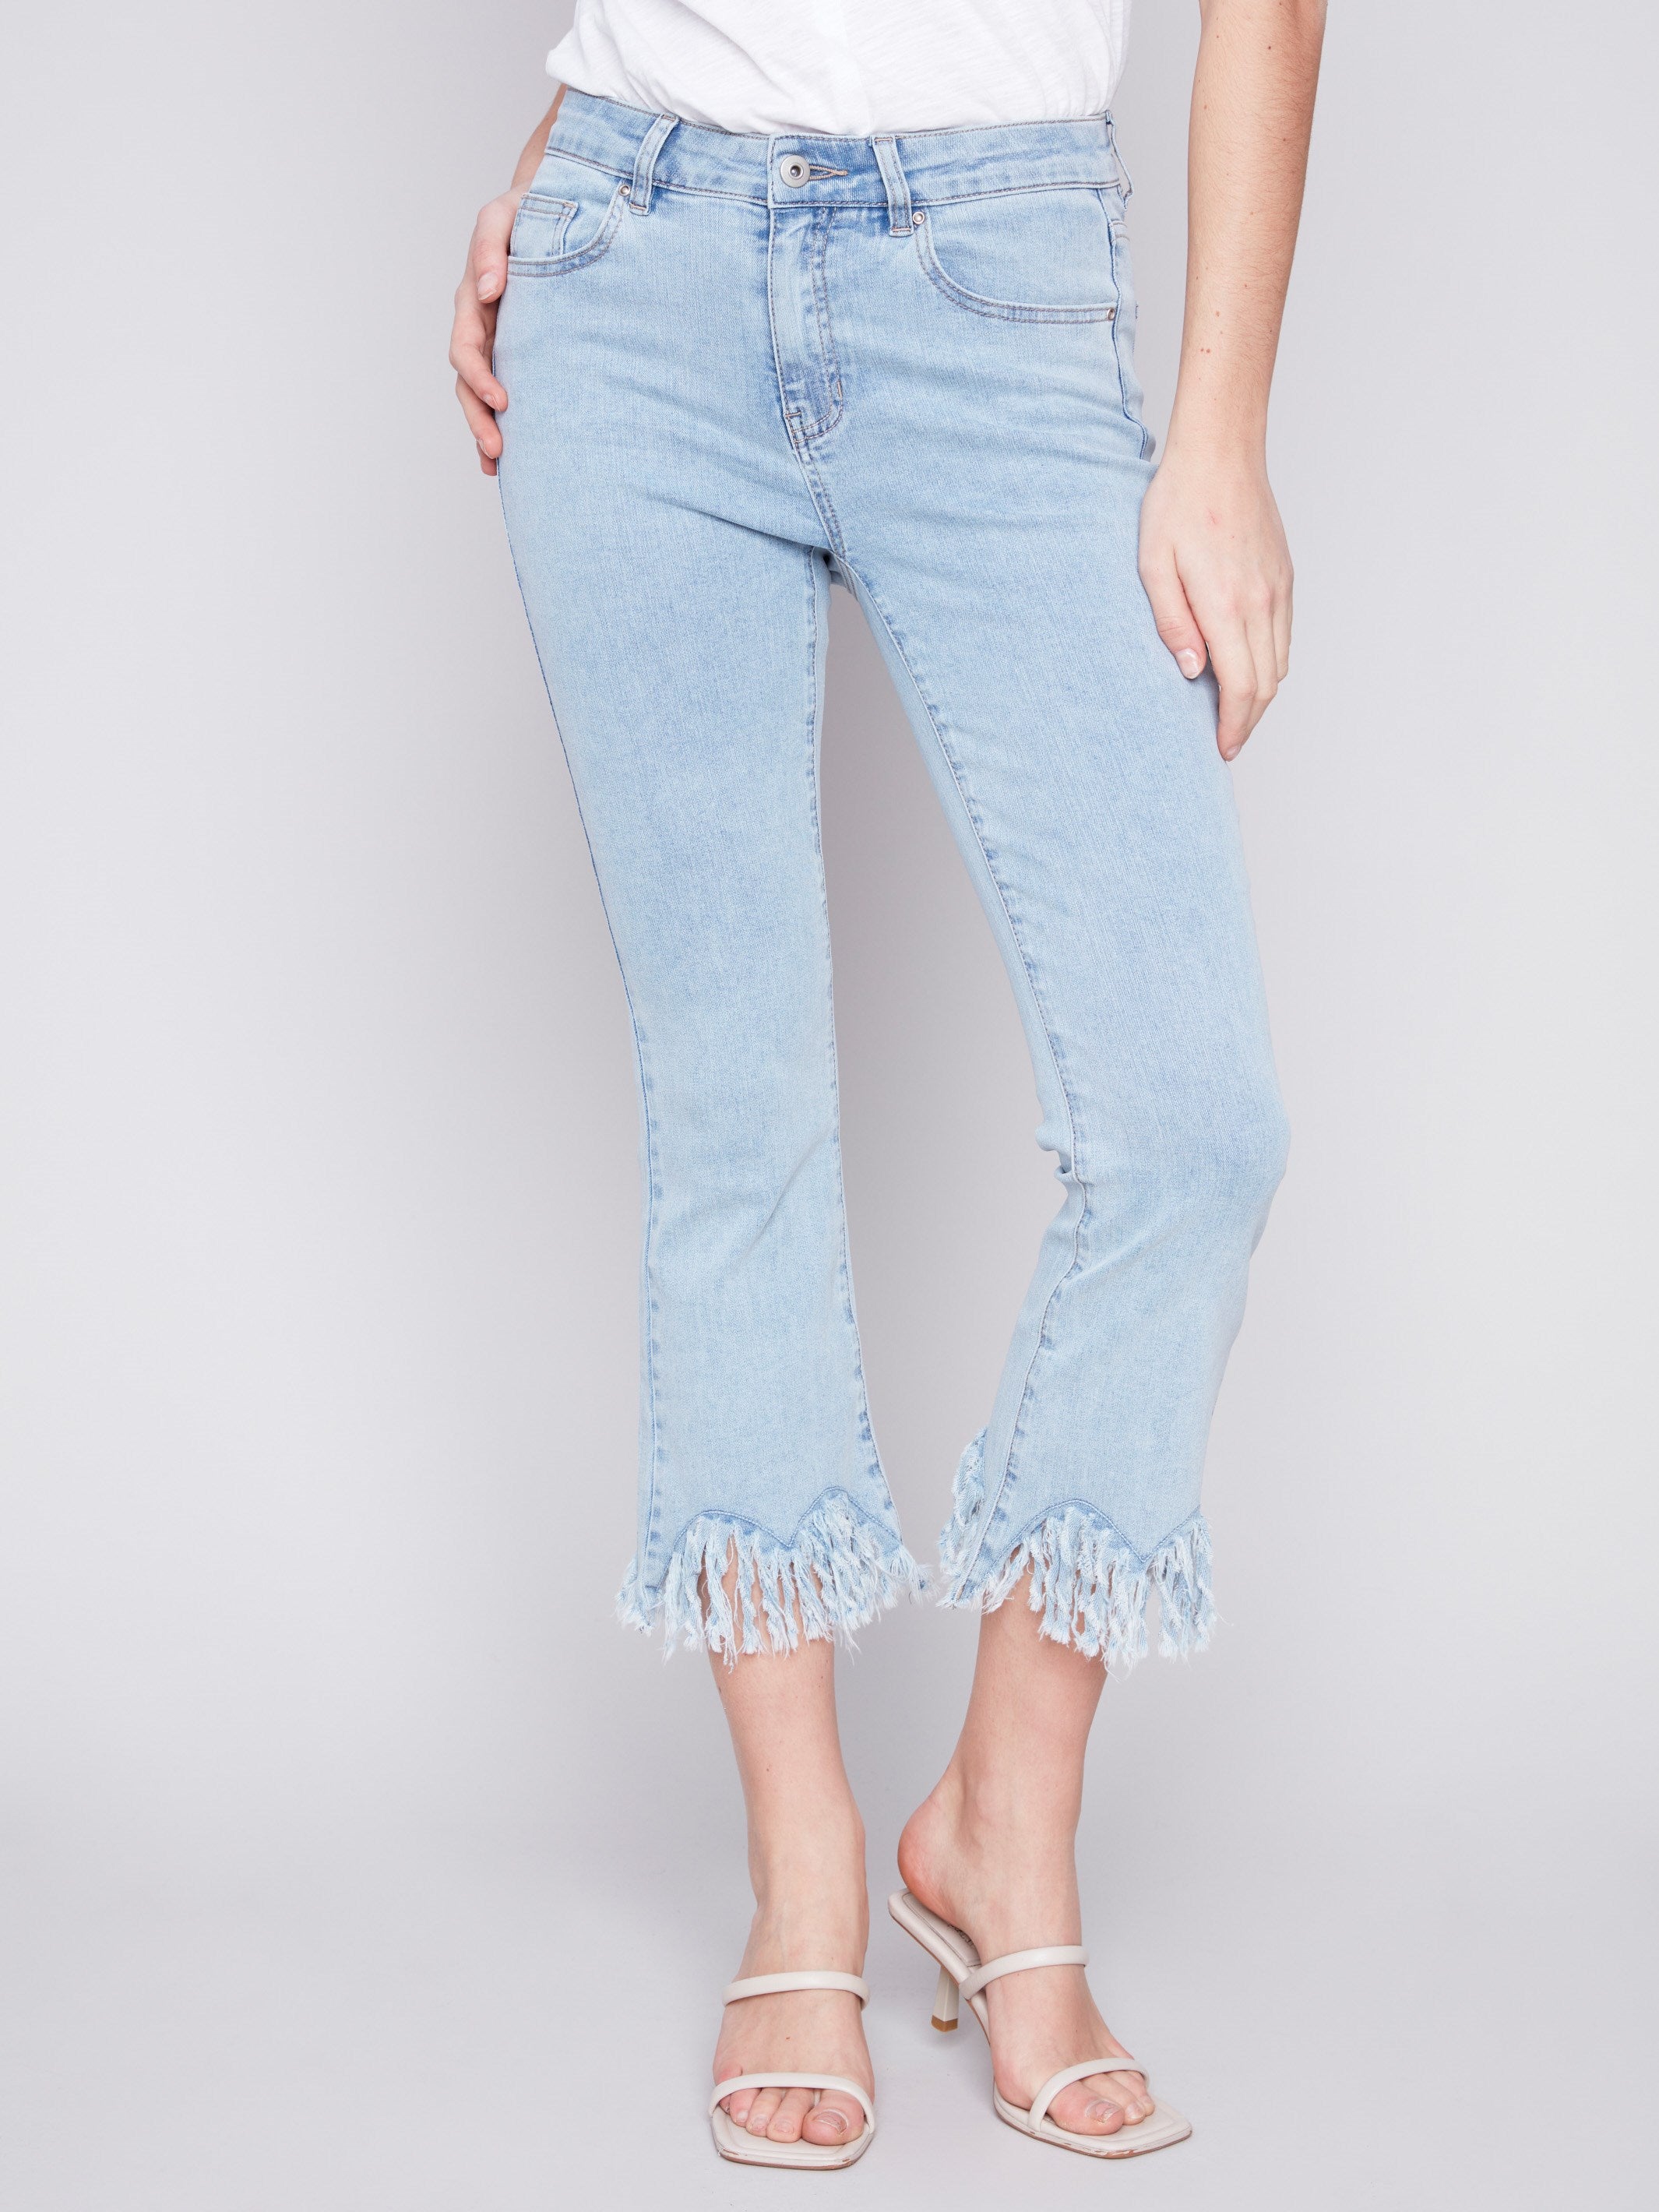 Charlie B Cropped Jeans with Fringed Hem - Bleach Blue - Image 2